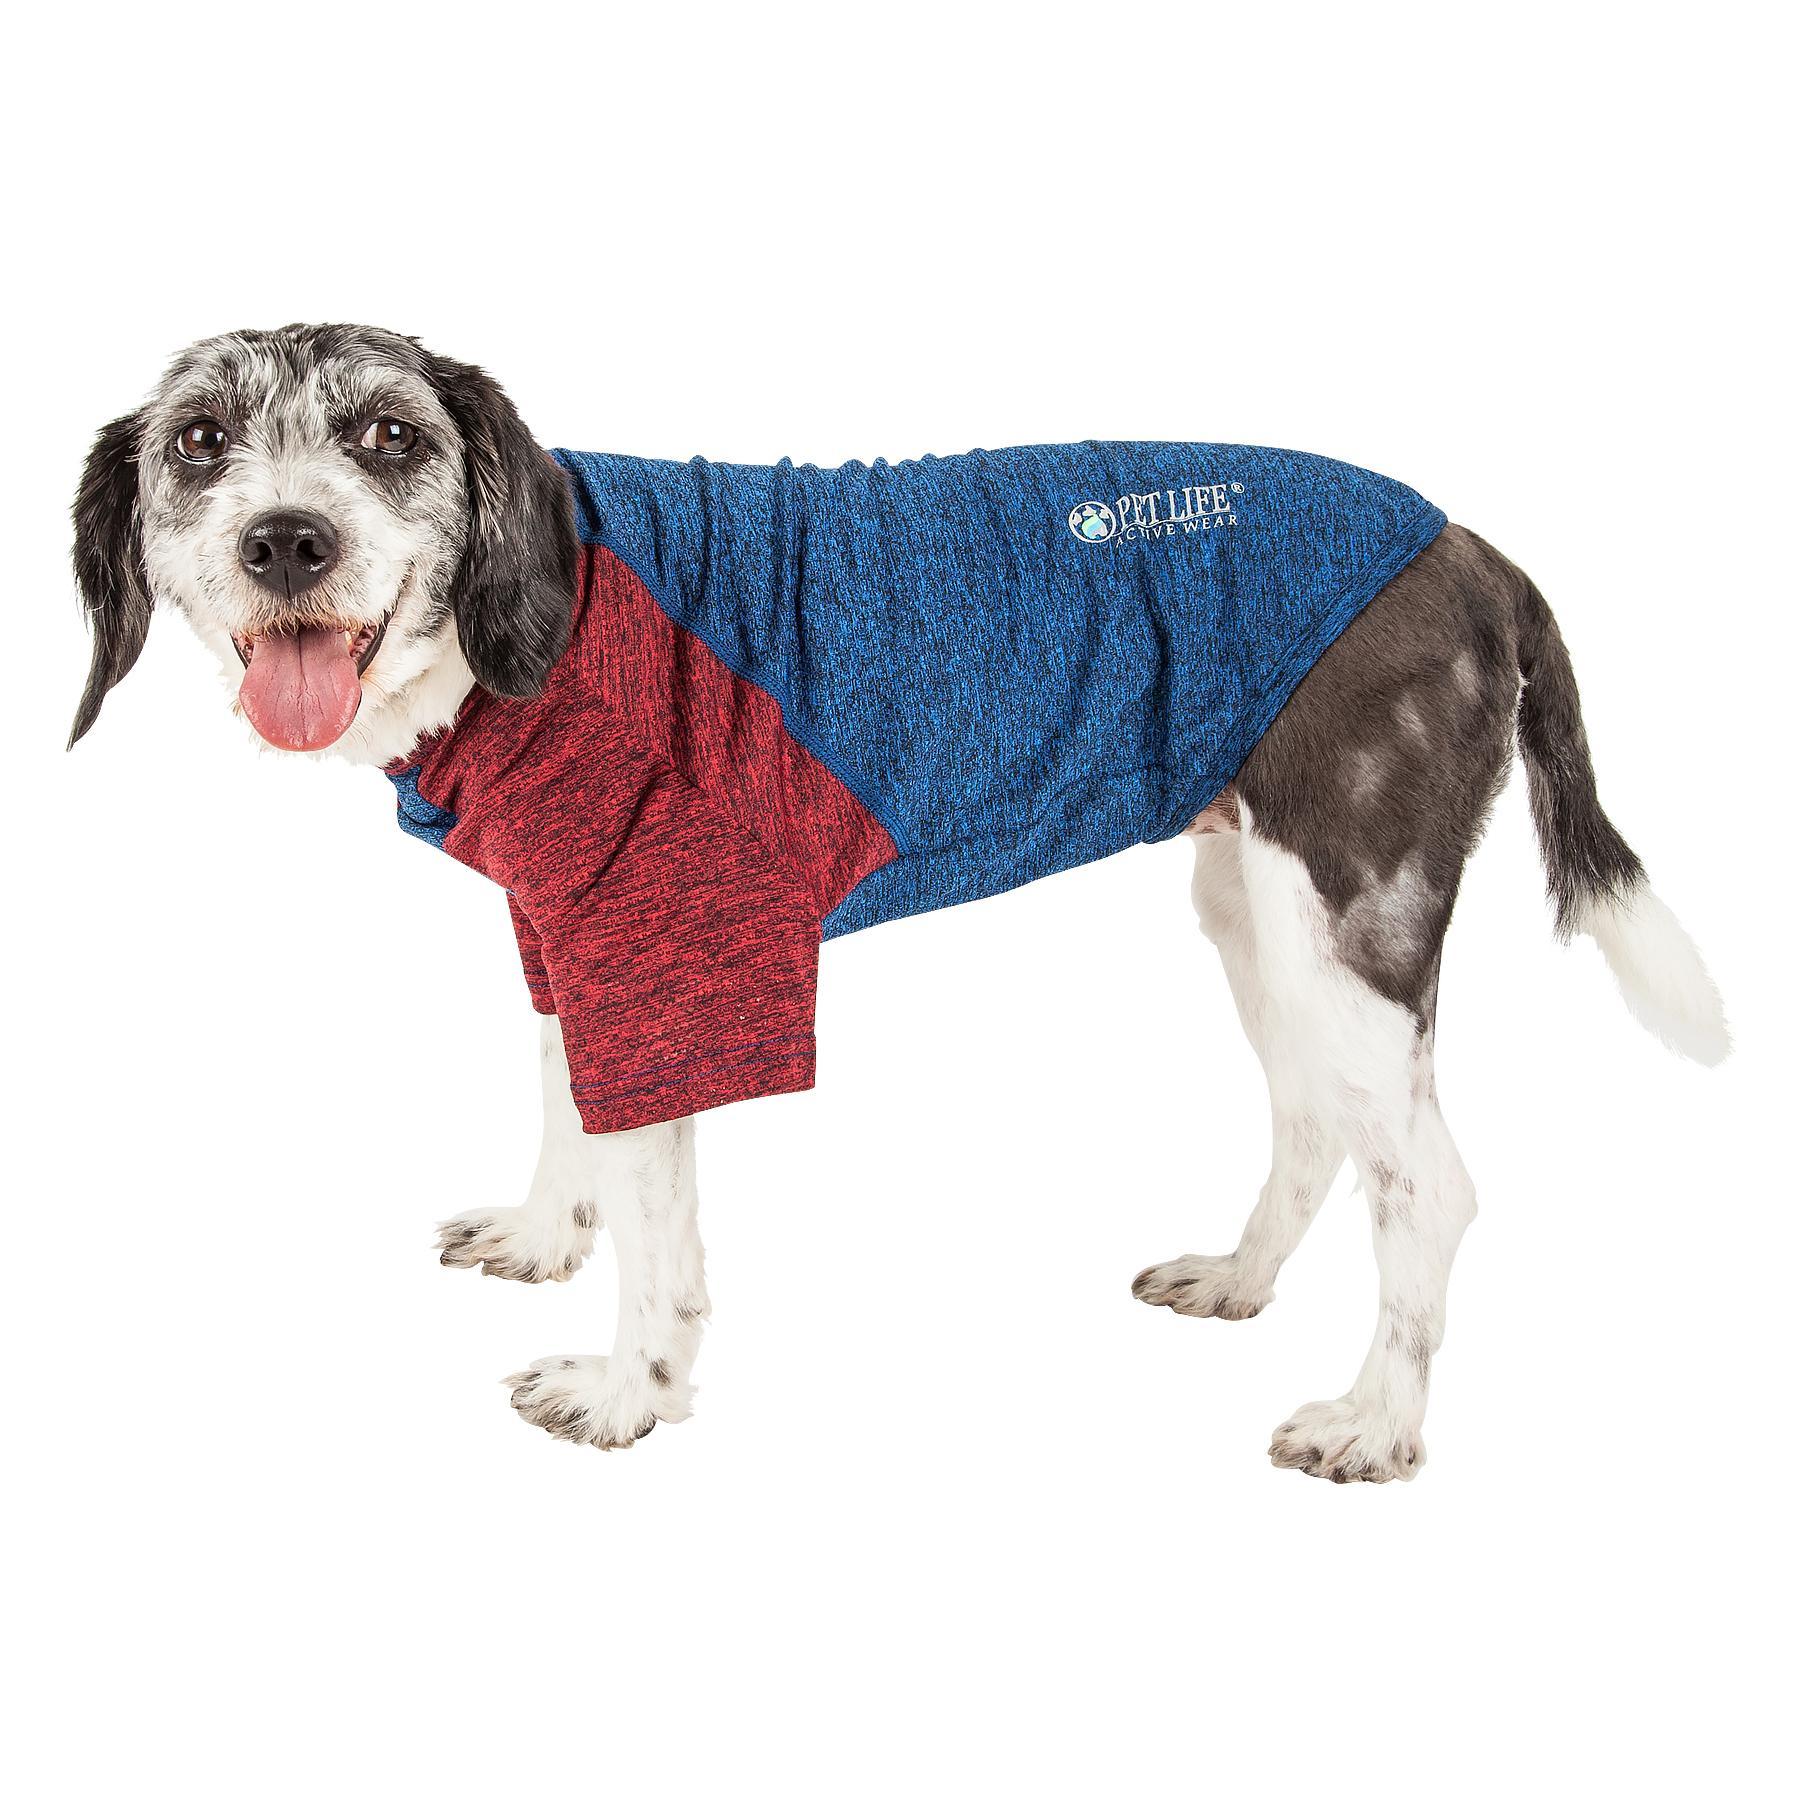 Pet Life ACTIVE Hybreed Two-Toned Performance Dog T-Shirt - Blue and Maroon